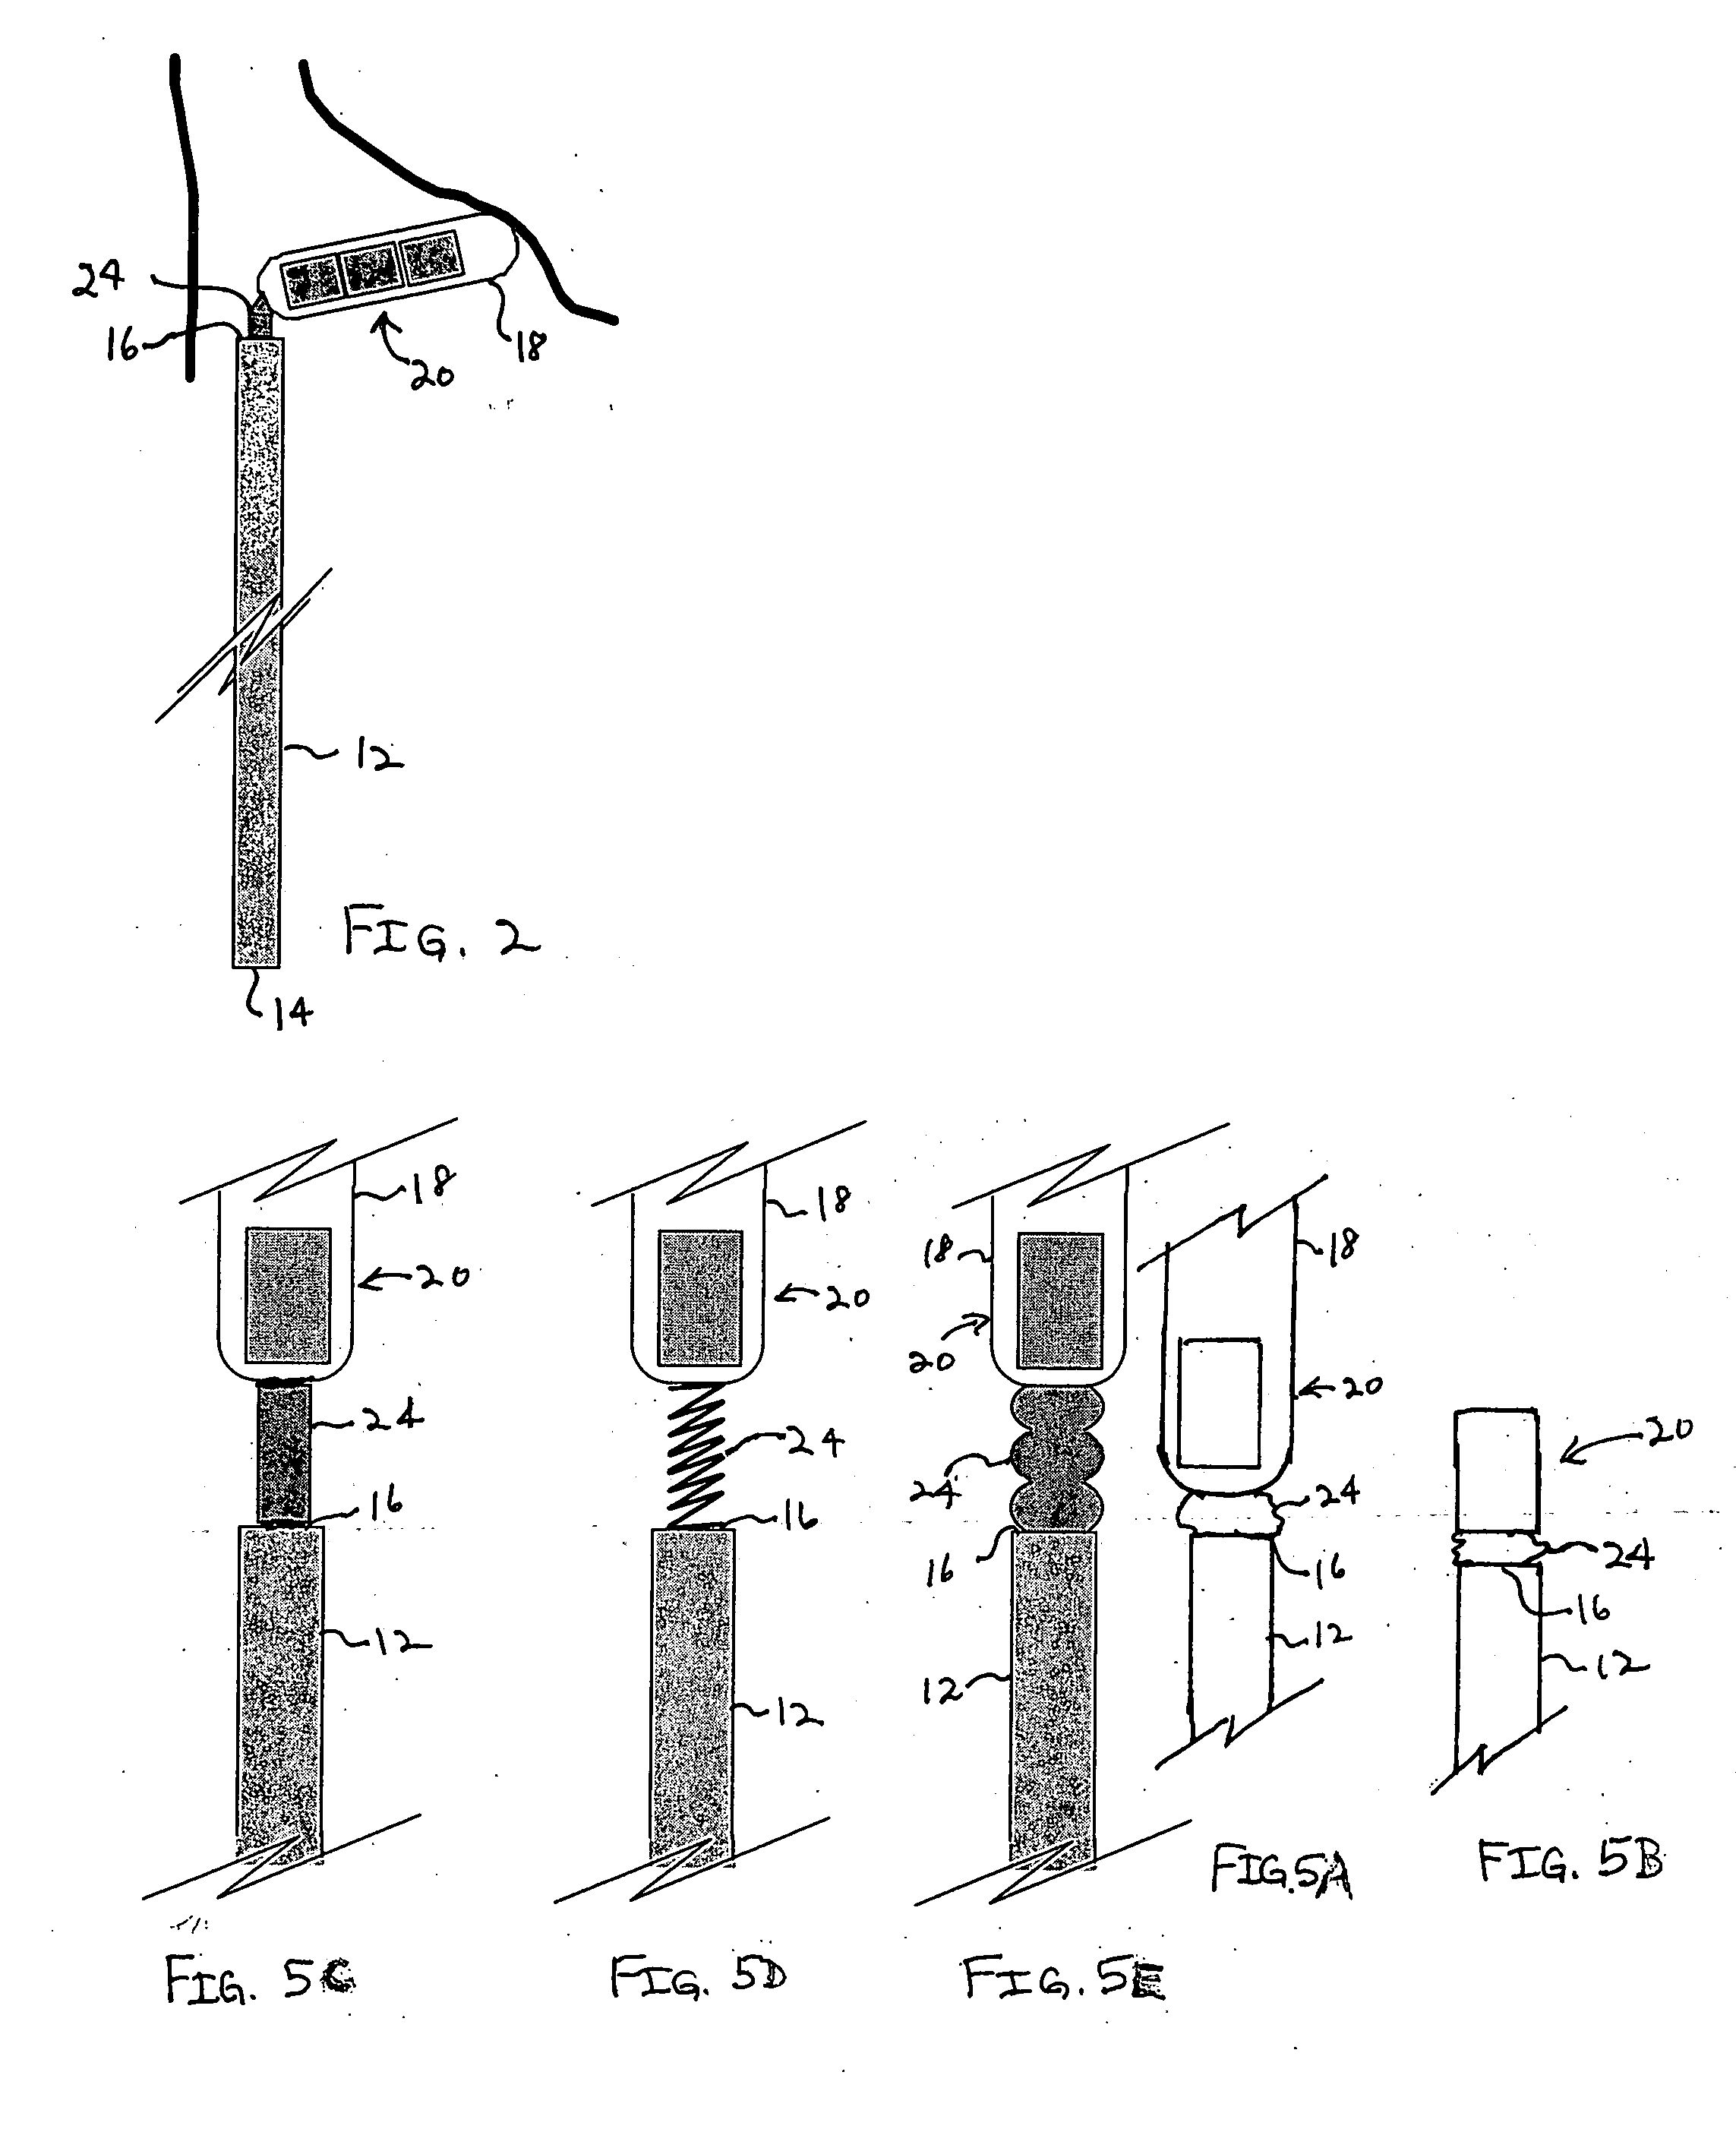 Method and apparatus for indicating an encountered obstacle during insertion of a medical device